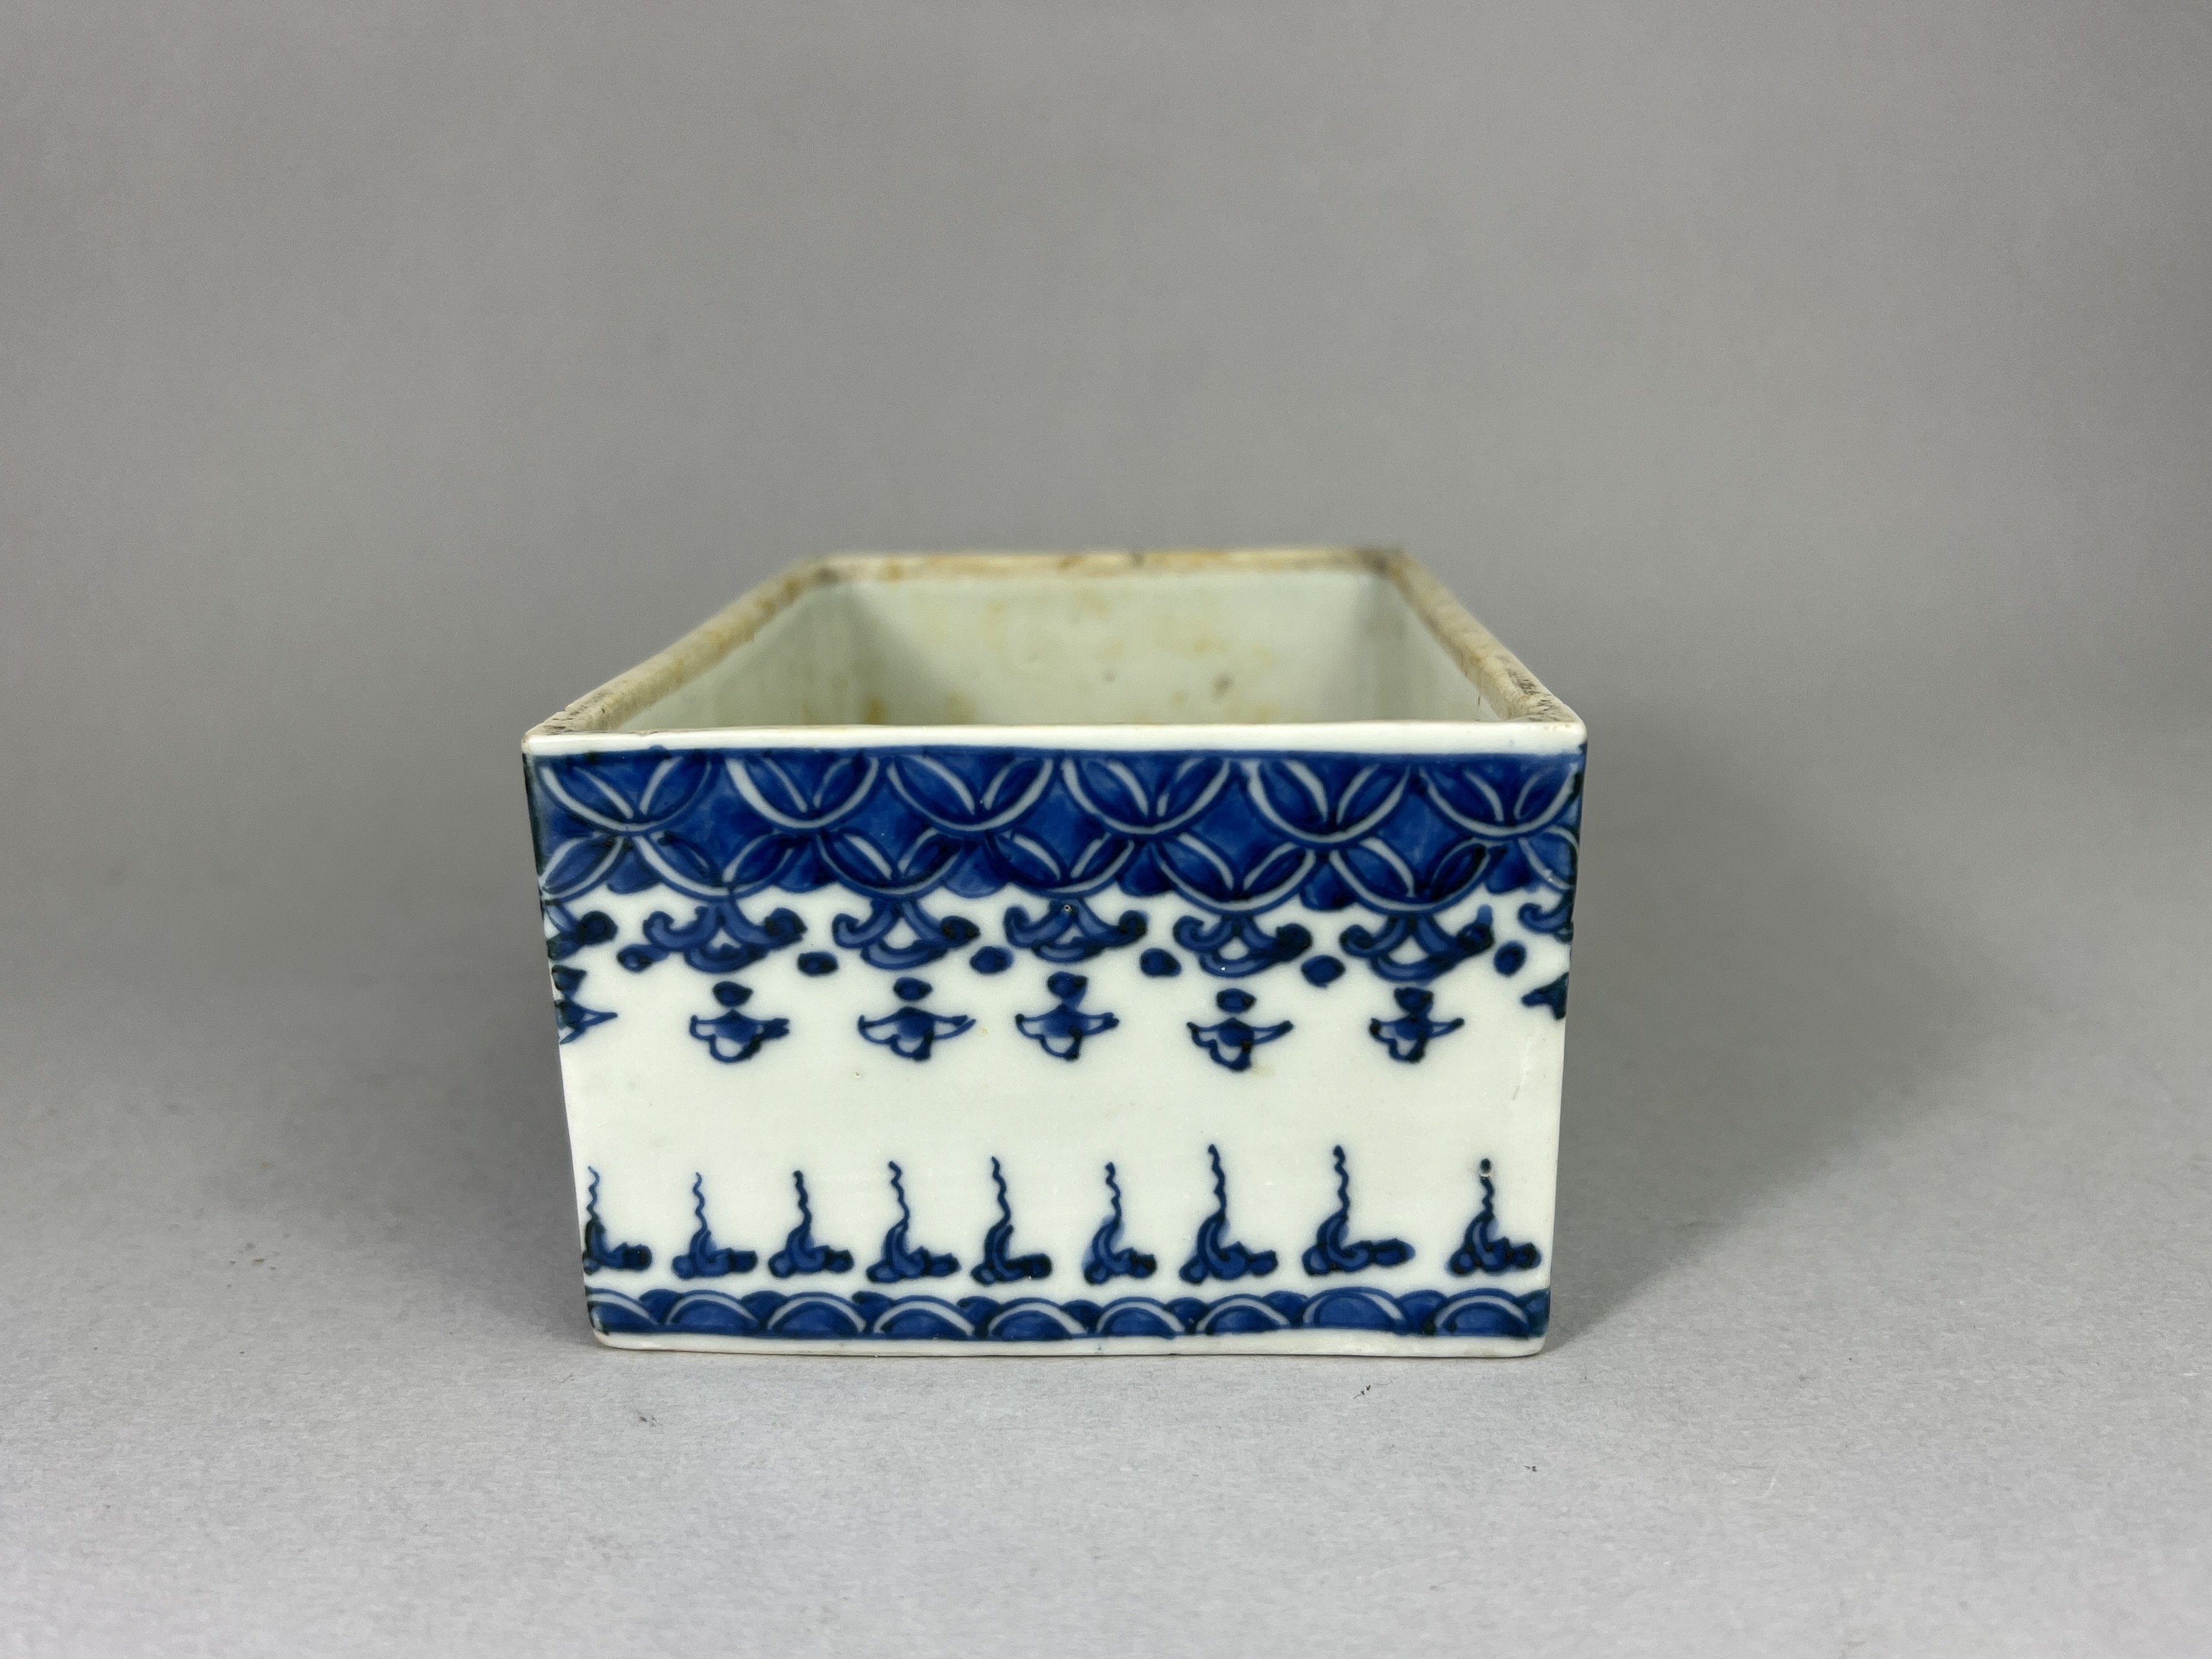 Four Japanese porcelain items, 19th centuryJapanese porcelain, 19th century, the four attractive - Image 6 of 23